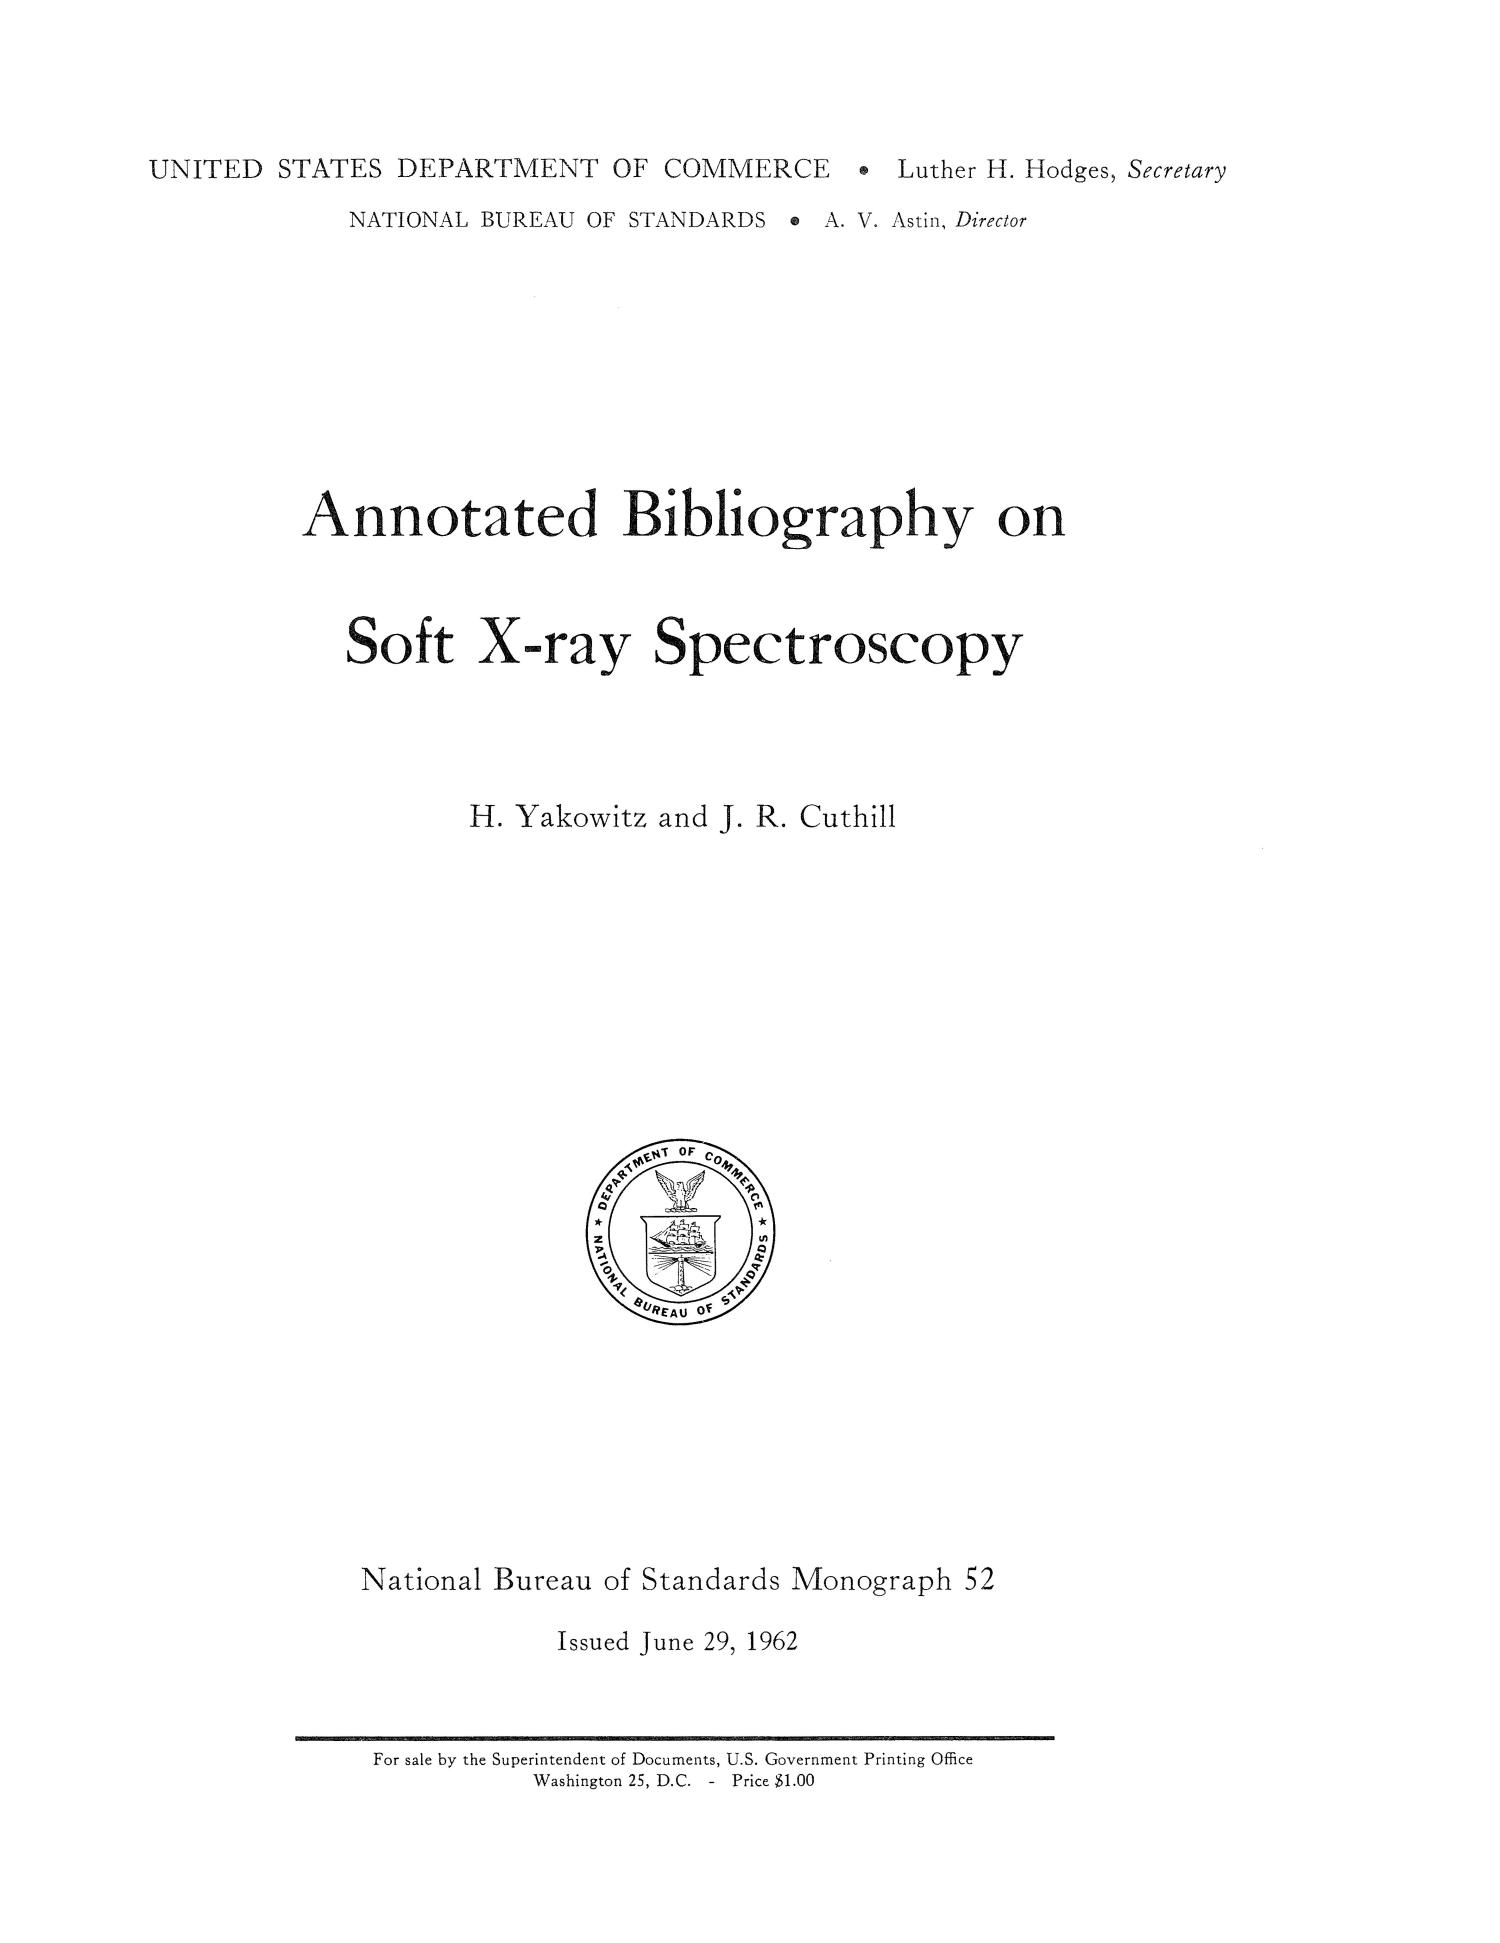 annotated-bibliography-on-soft-x-ray-spectroscopy-page-title-page